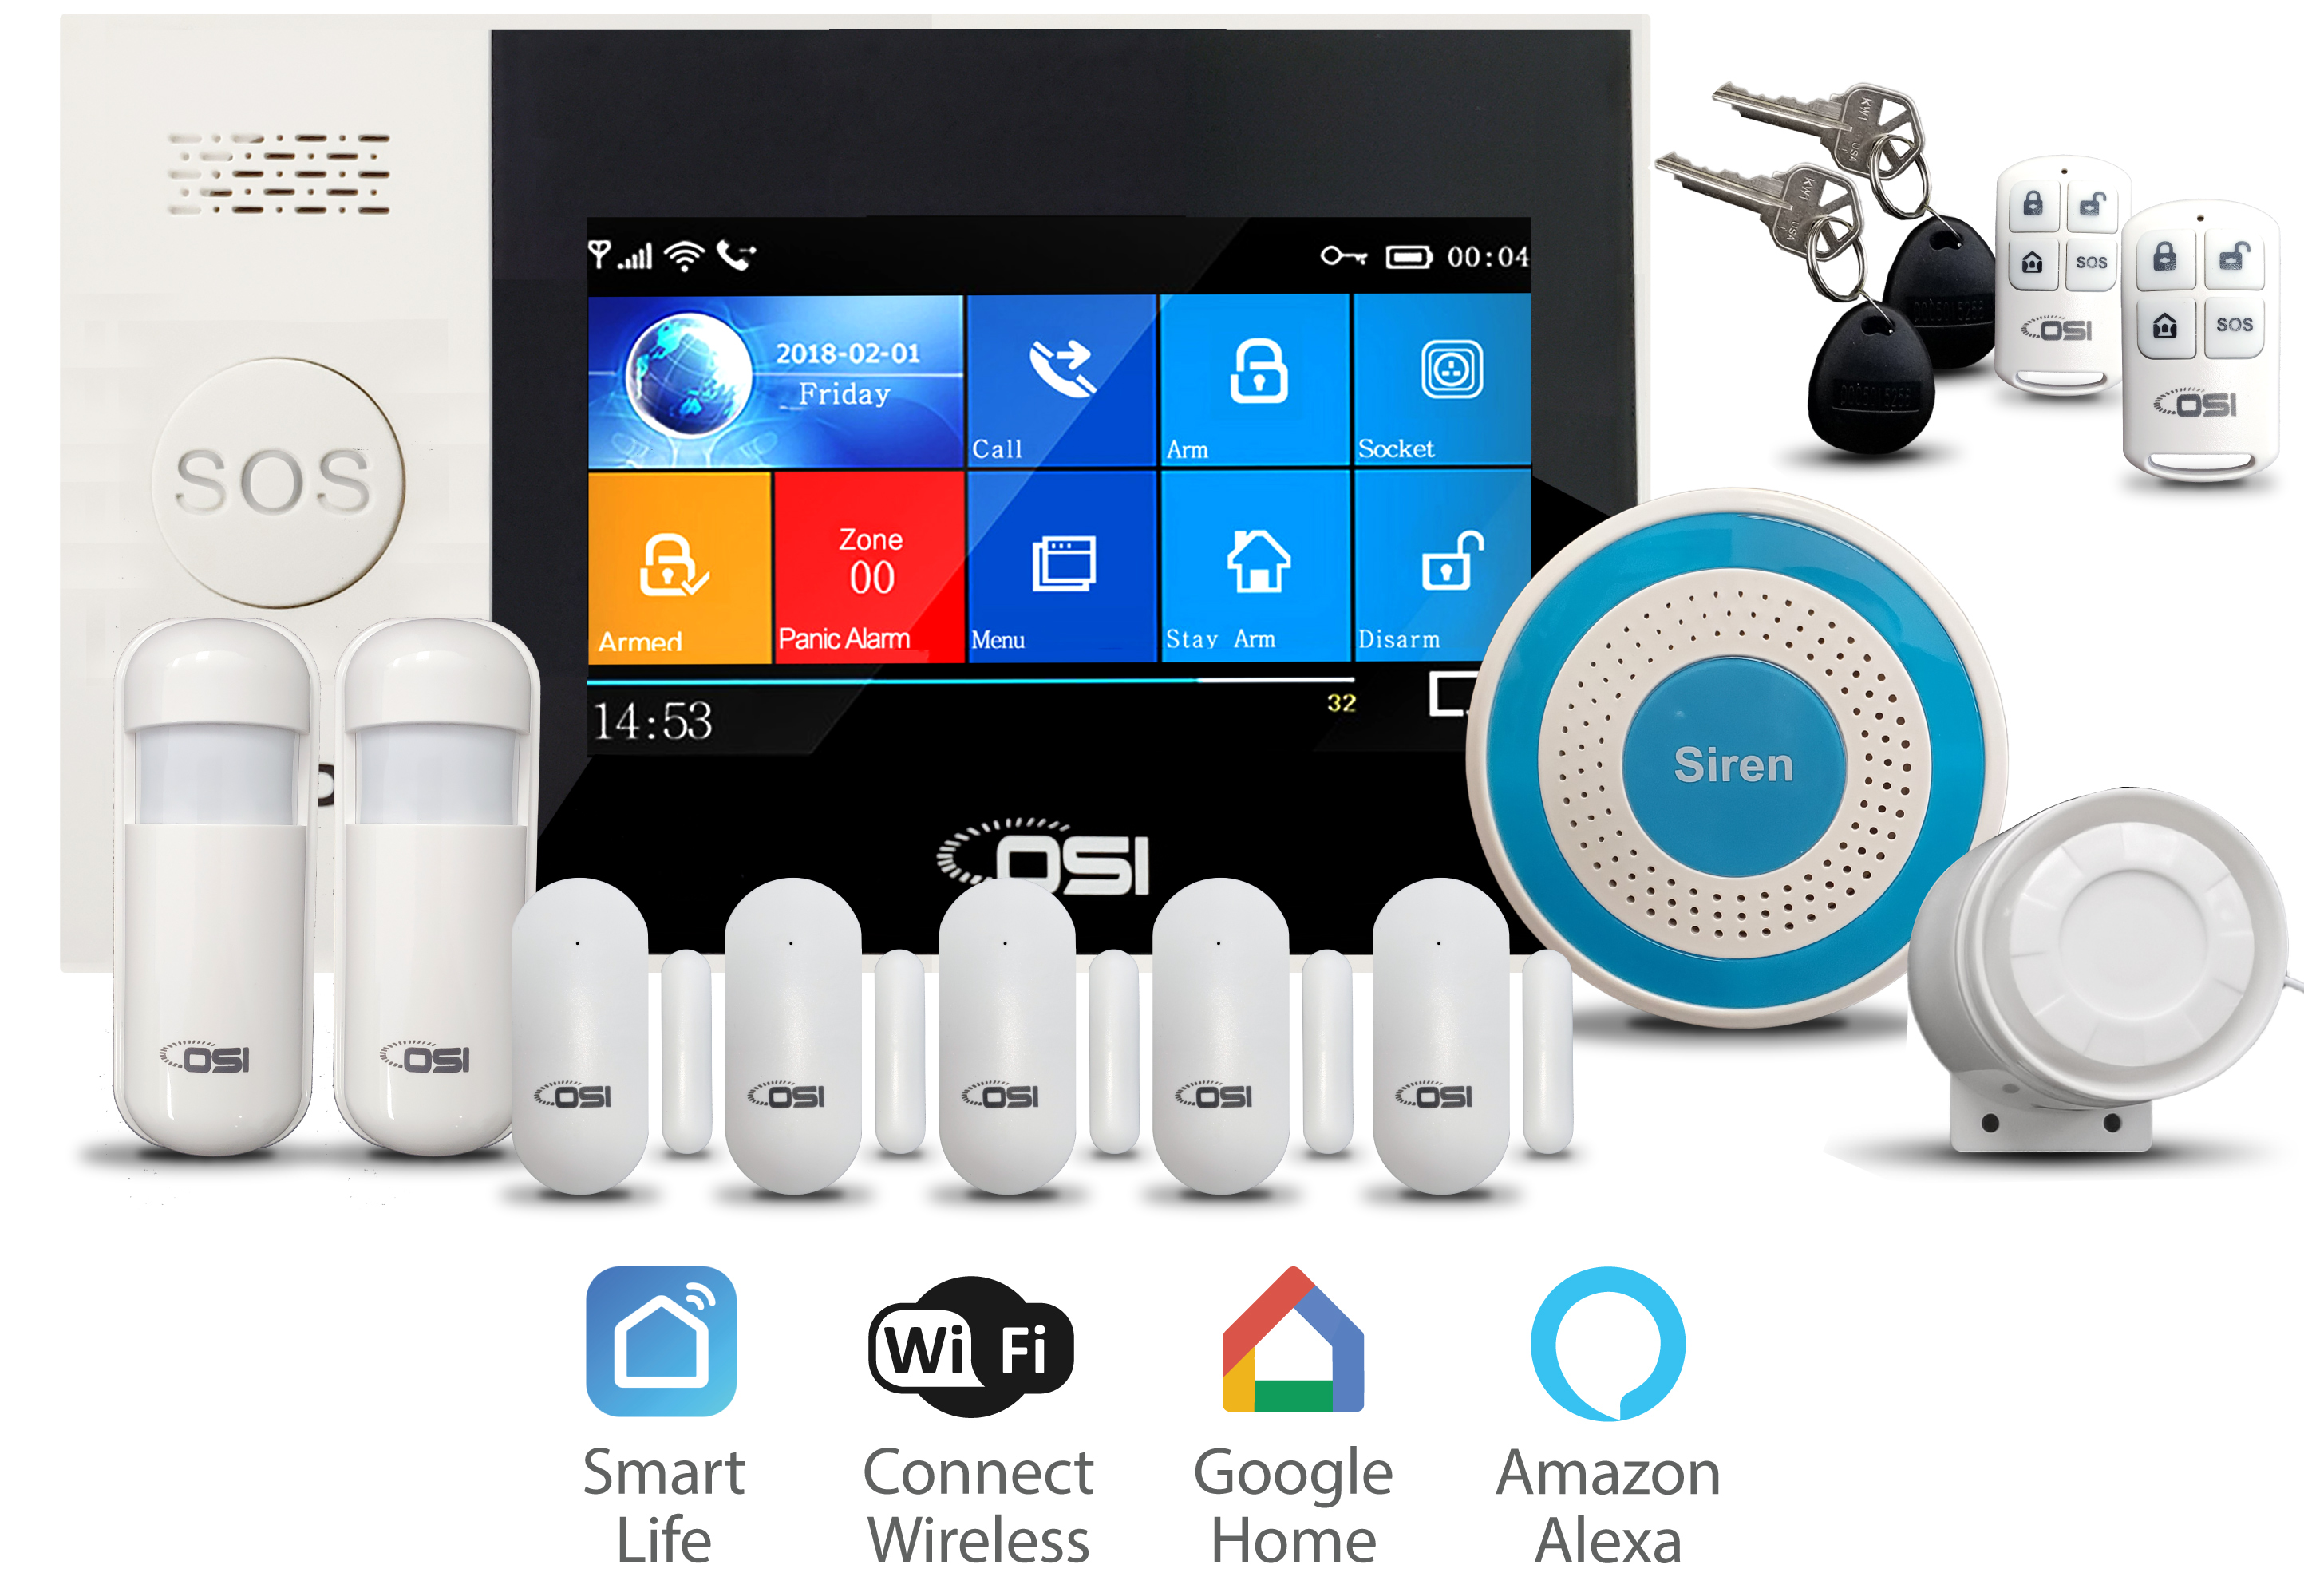 DIY Smart Wi-Fi Alarm System - 14-Piece (No monthly fees) Questions & Answers